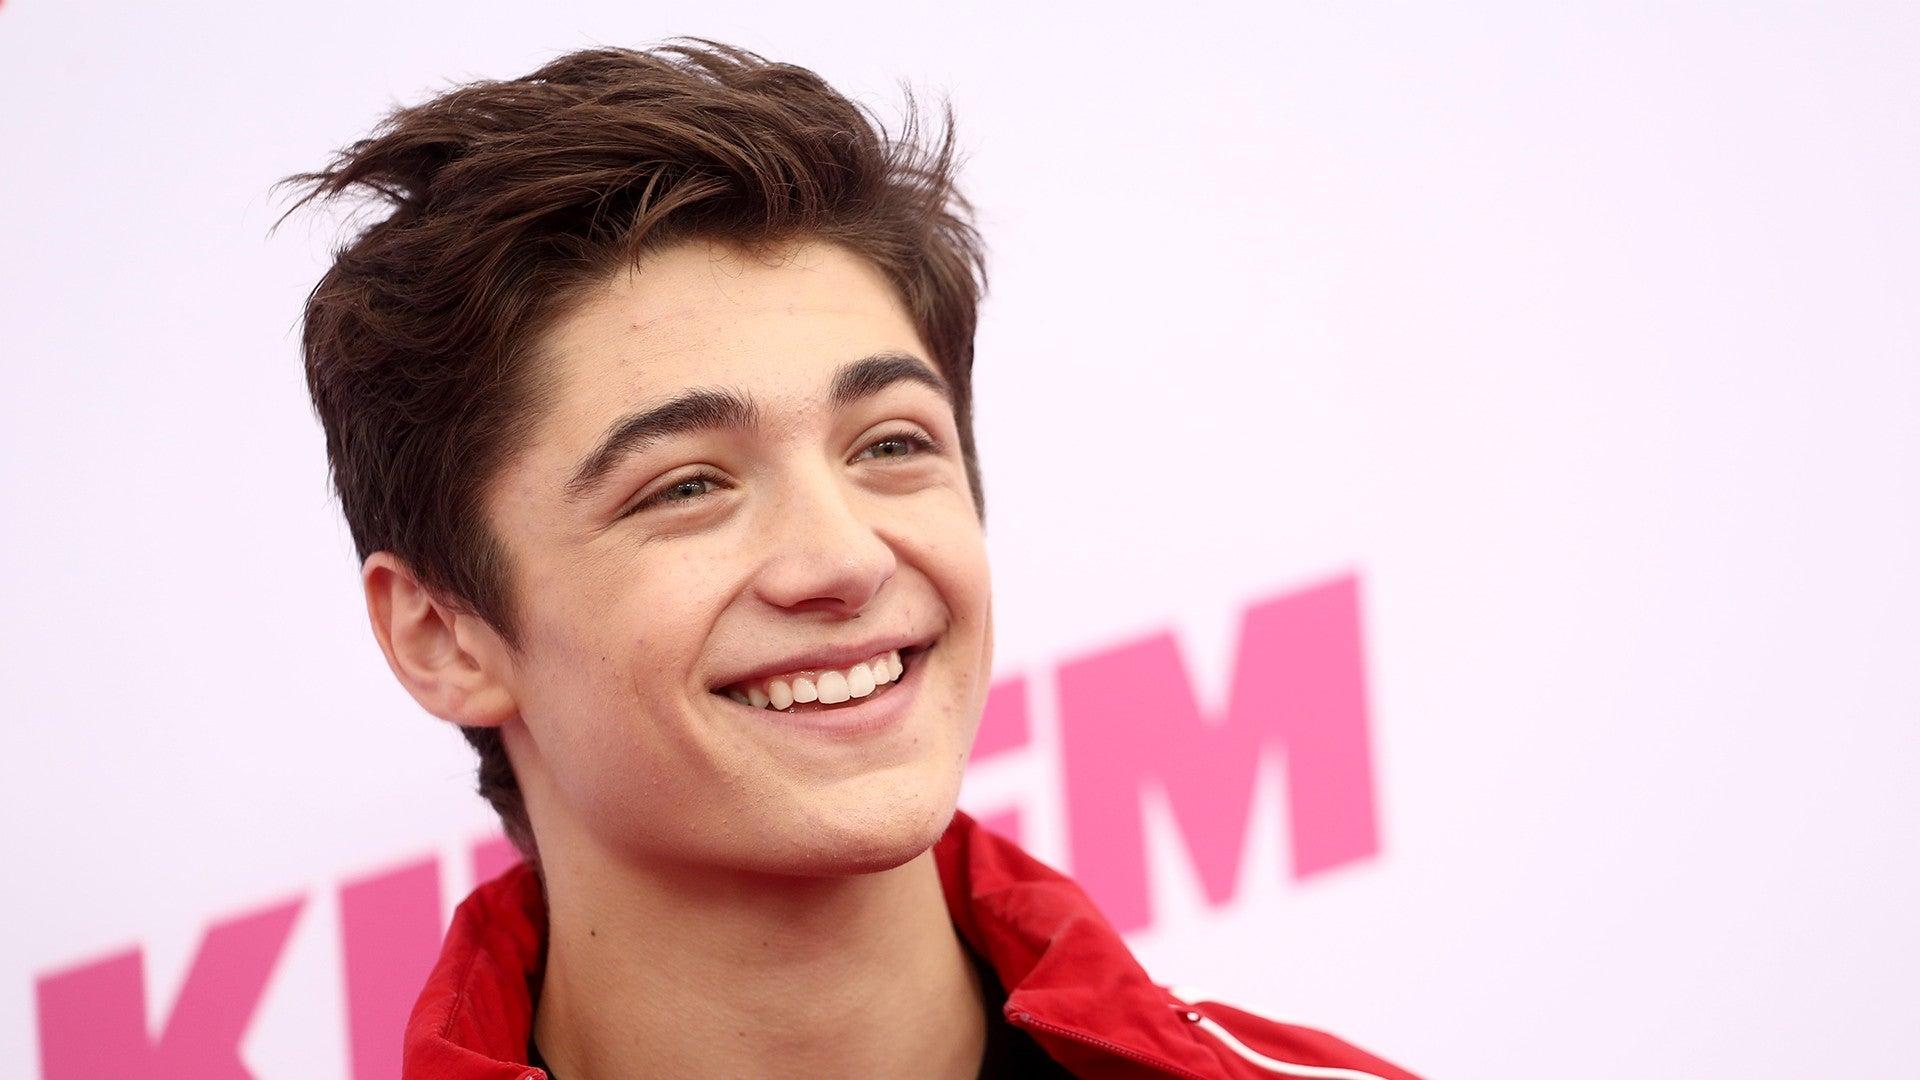 Asher Angel on Whether He and Girlfriend Annie LeBlanc Will